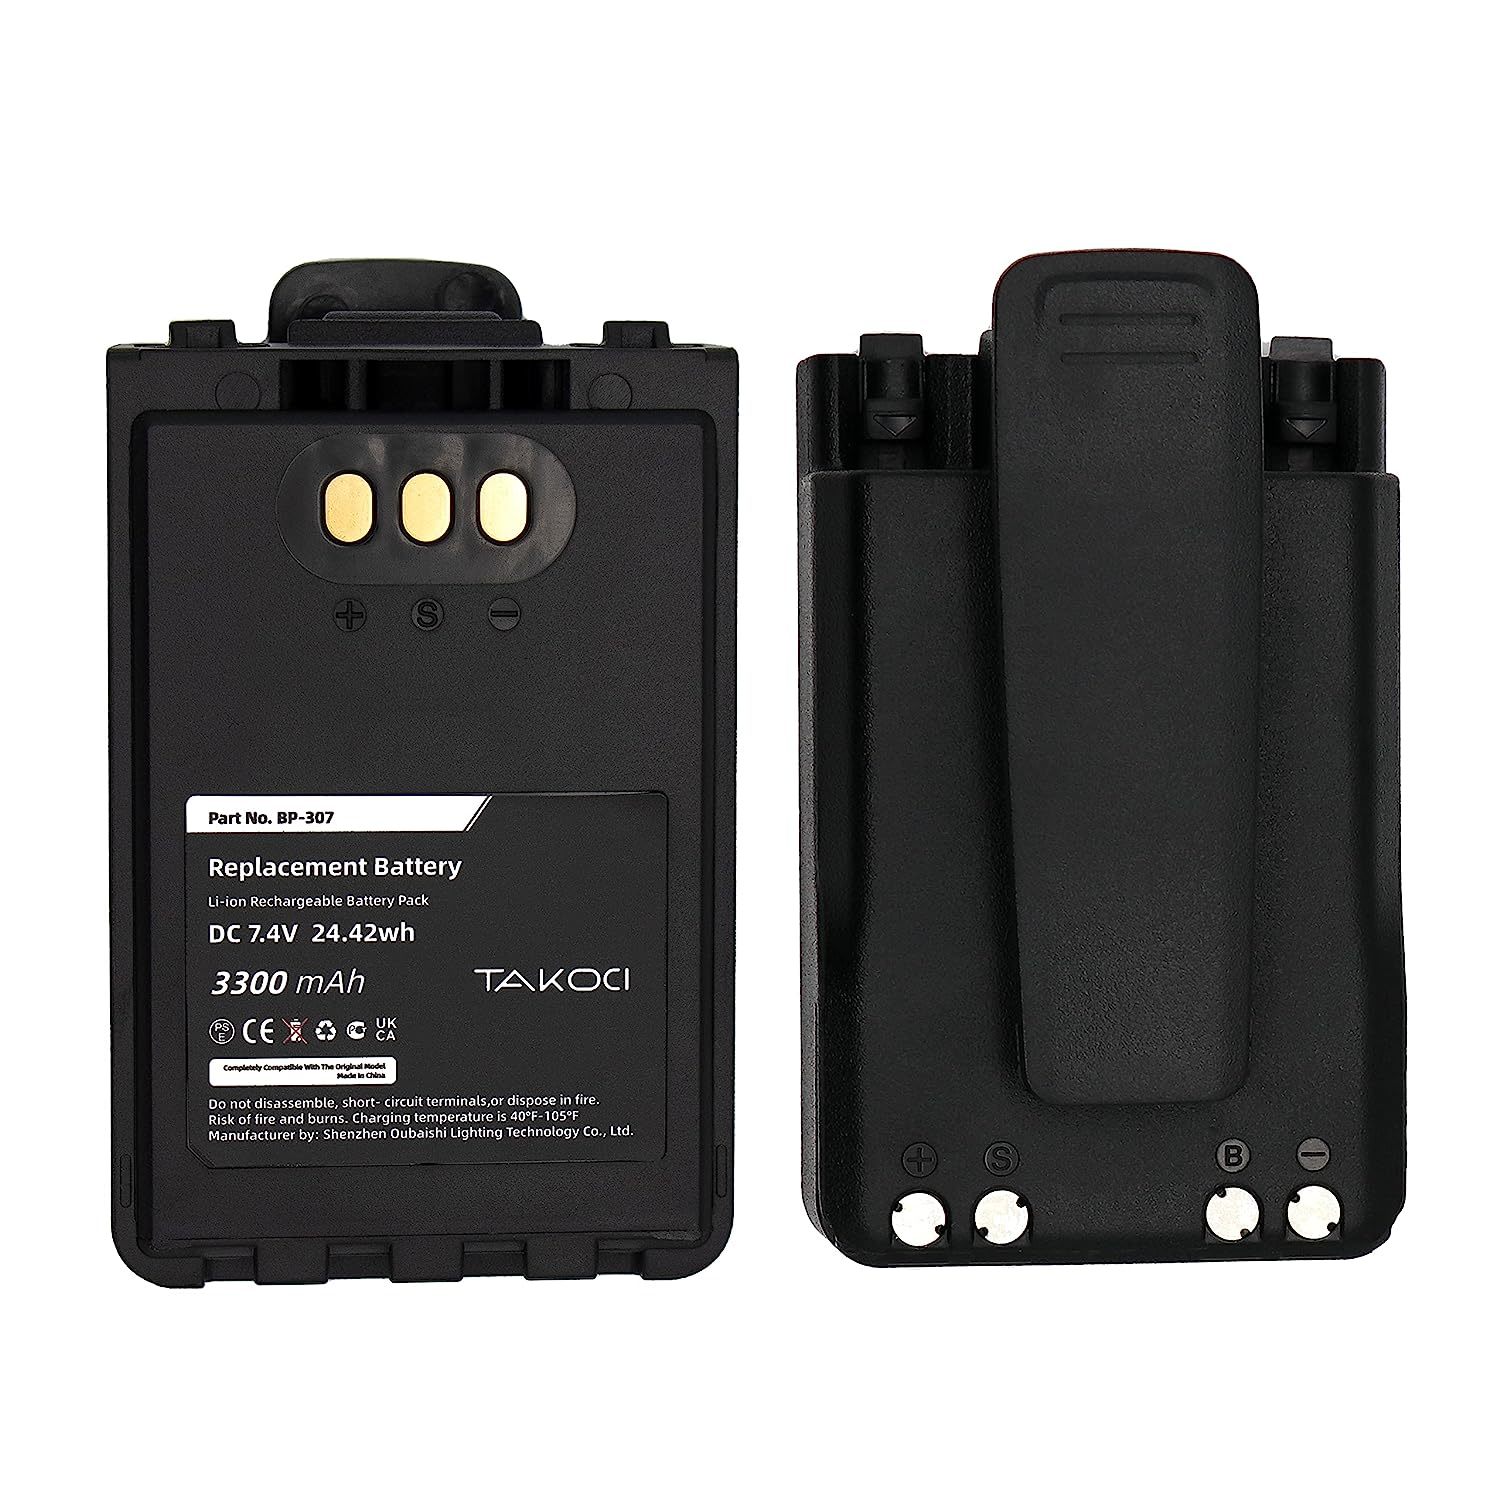 Replacement Battery For Icom Bp-307 Ic-705 Id-31E Id-51E Id-52E Ip-100H Ip-501H  - $56.04